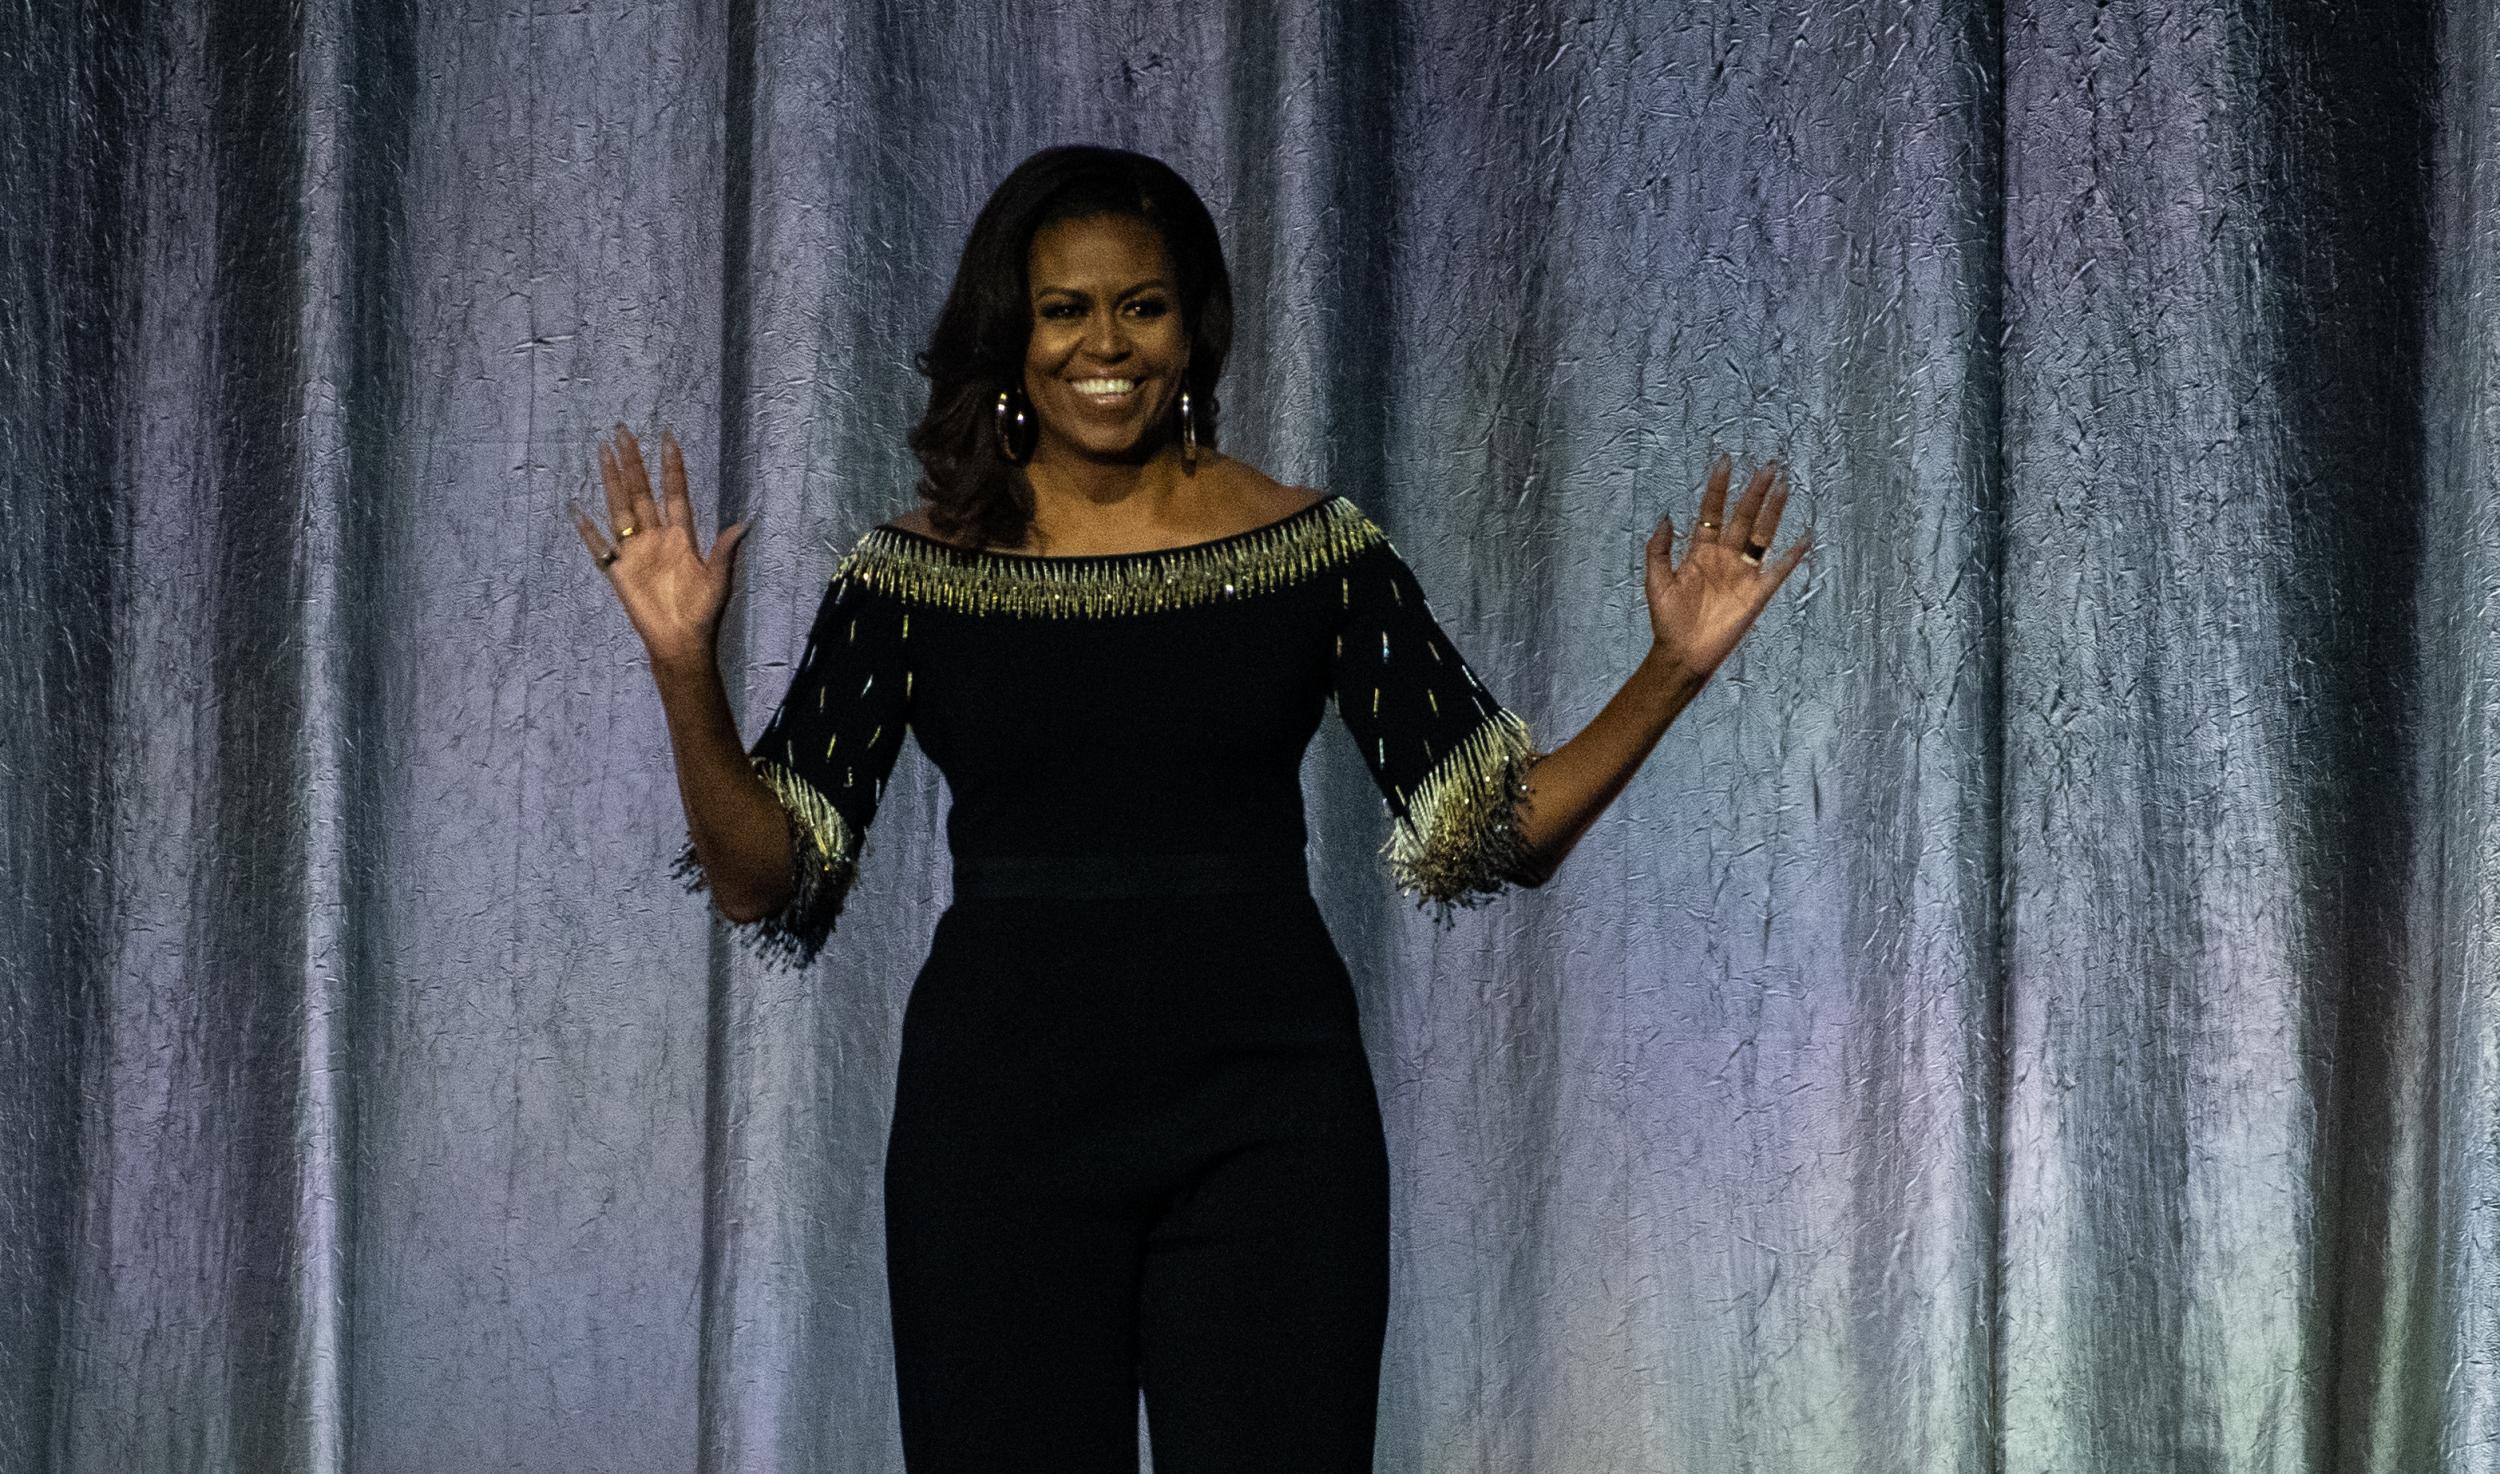 Michelle Obama speaks out about the dangers of social media: 'Put down the phone and start knocking on doors'